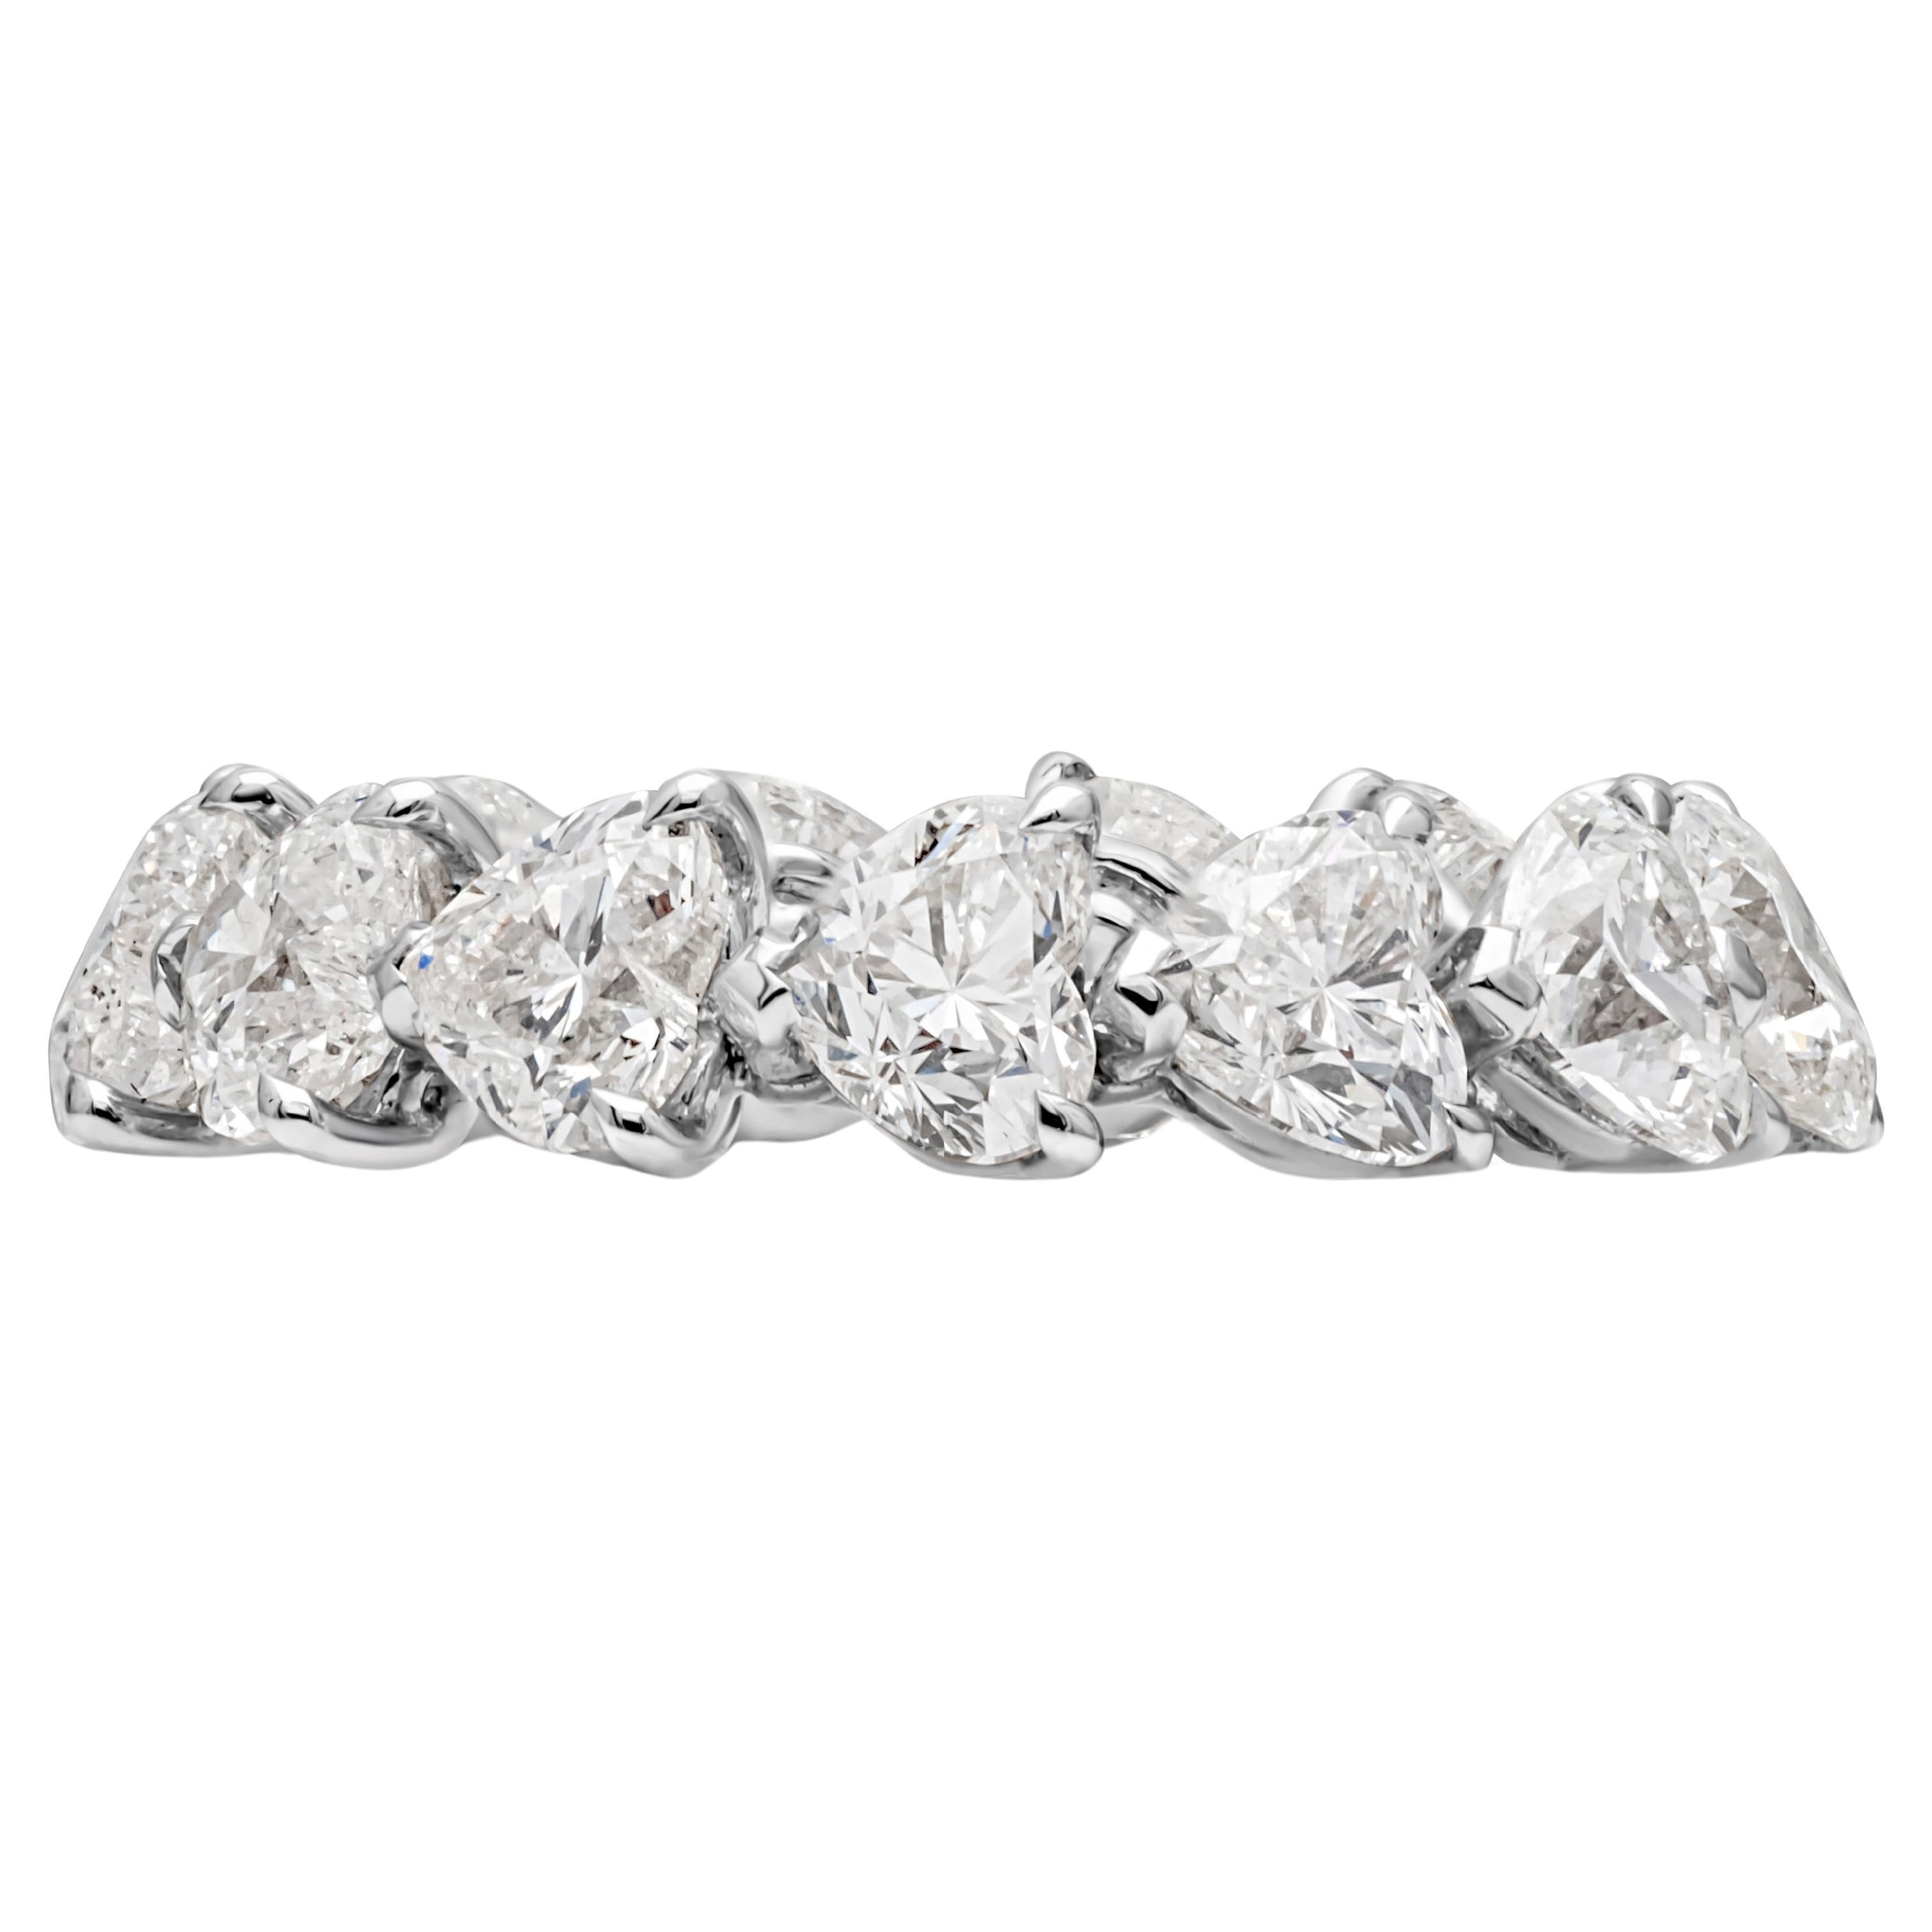 Showcasing a classic and unique wedding band set in a timeless flexible three prong basket setting with 13 heart shape diamonds weighing 5.36 carats total, H-S color and F in clarity. Finely made in 18k white gold and Size 5.75 US resizable upon